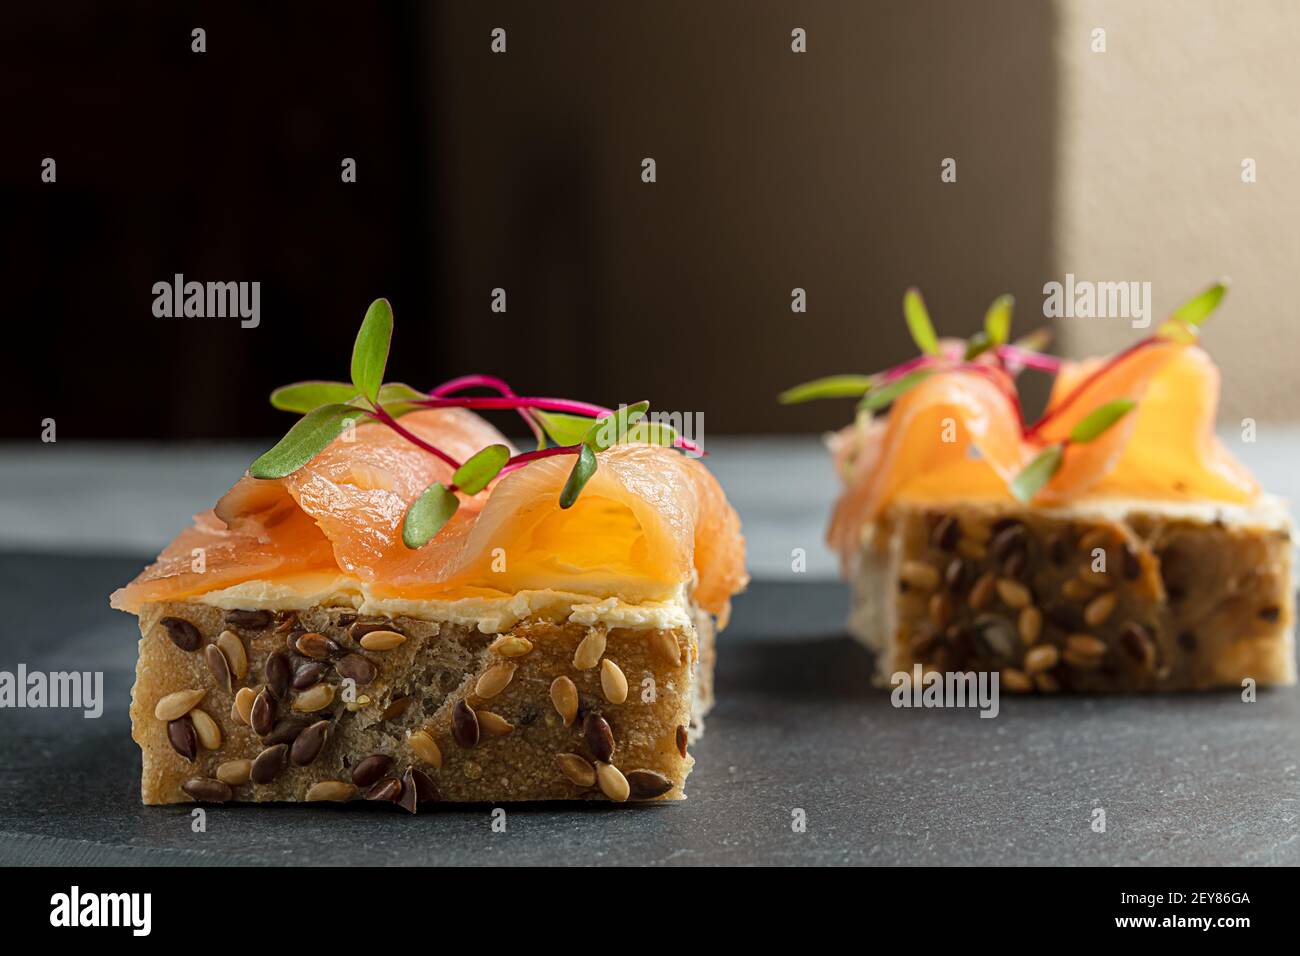 Cereal bread sandwiches with creamy cheese, smoked salmon and micro greens on a table Stock Photo